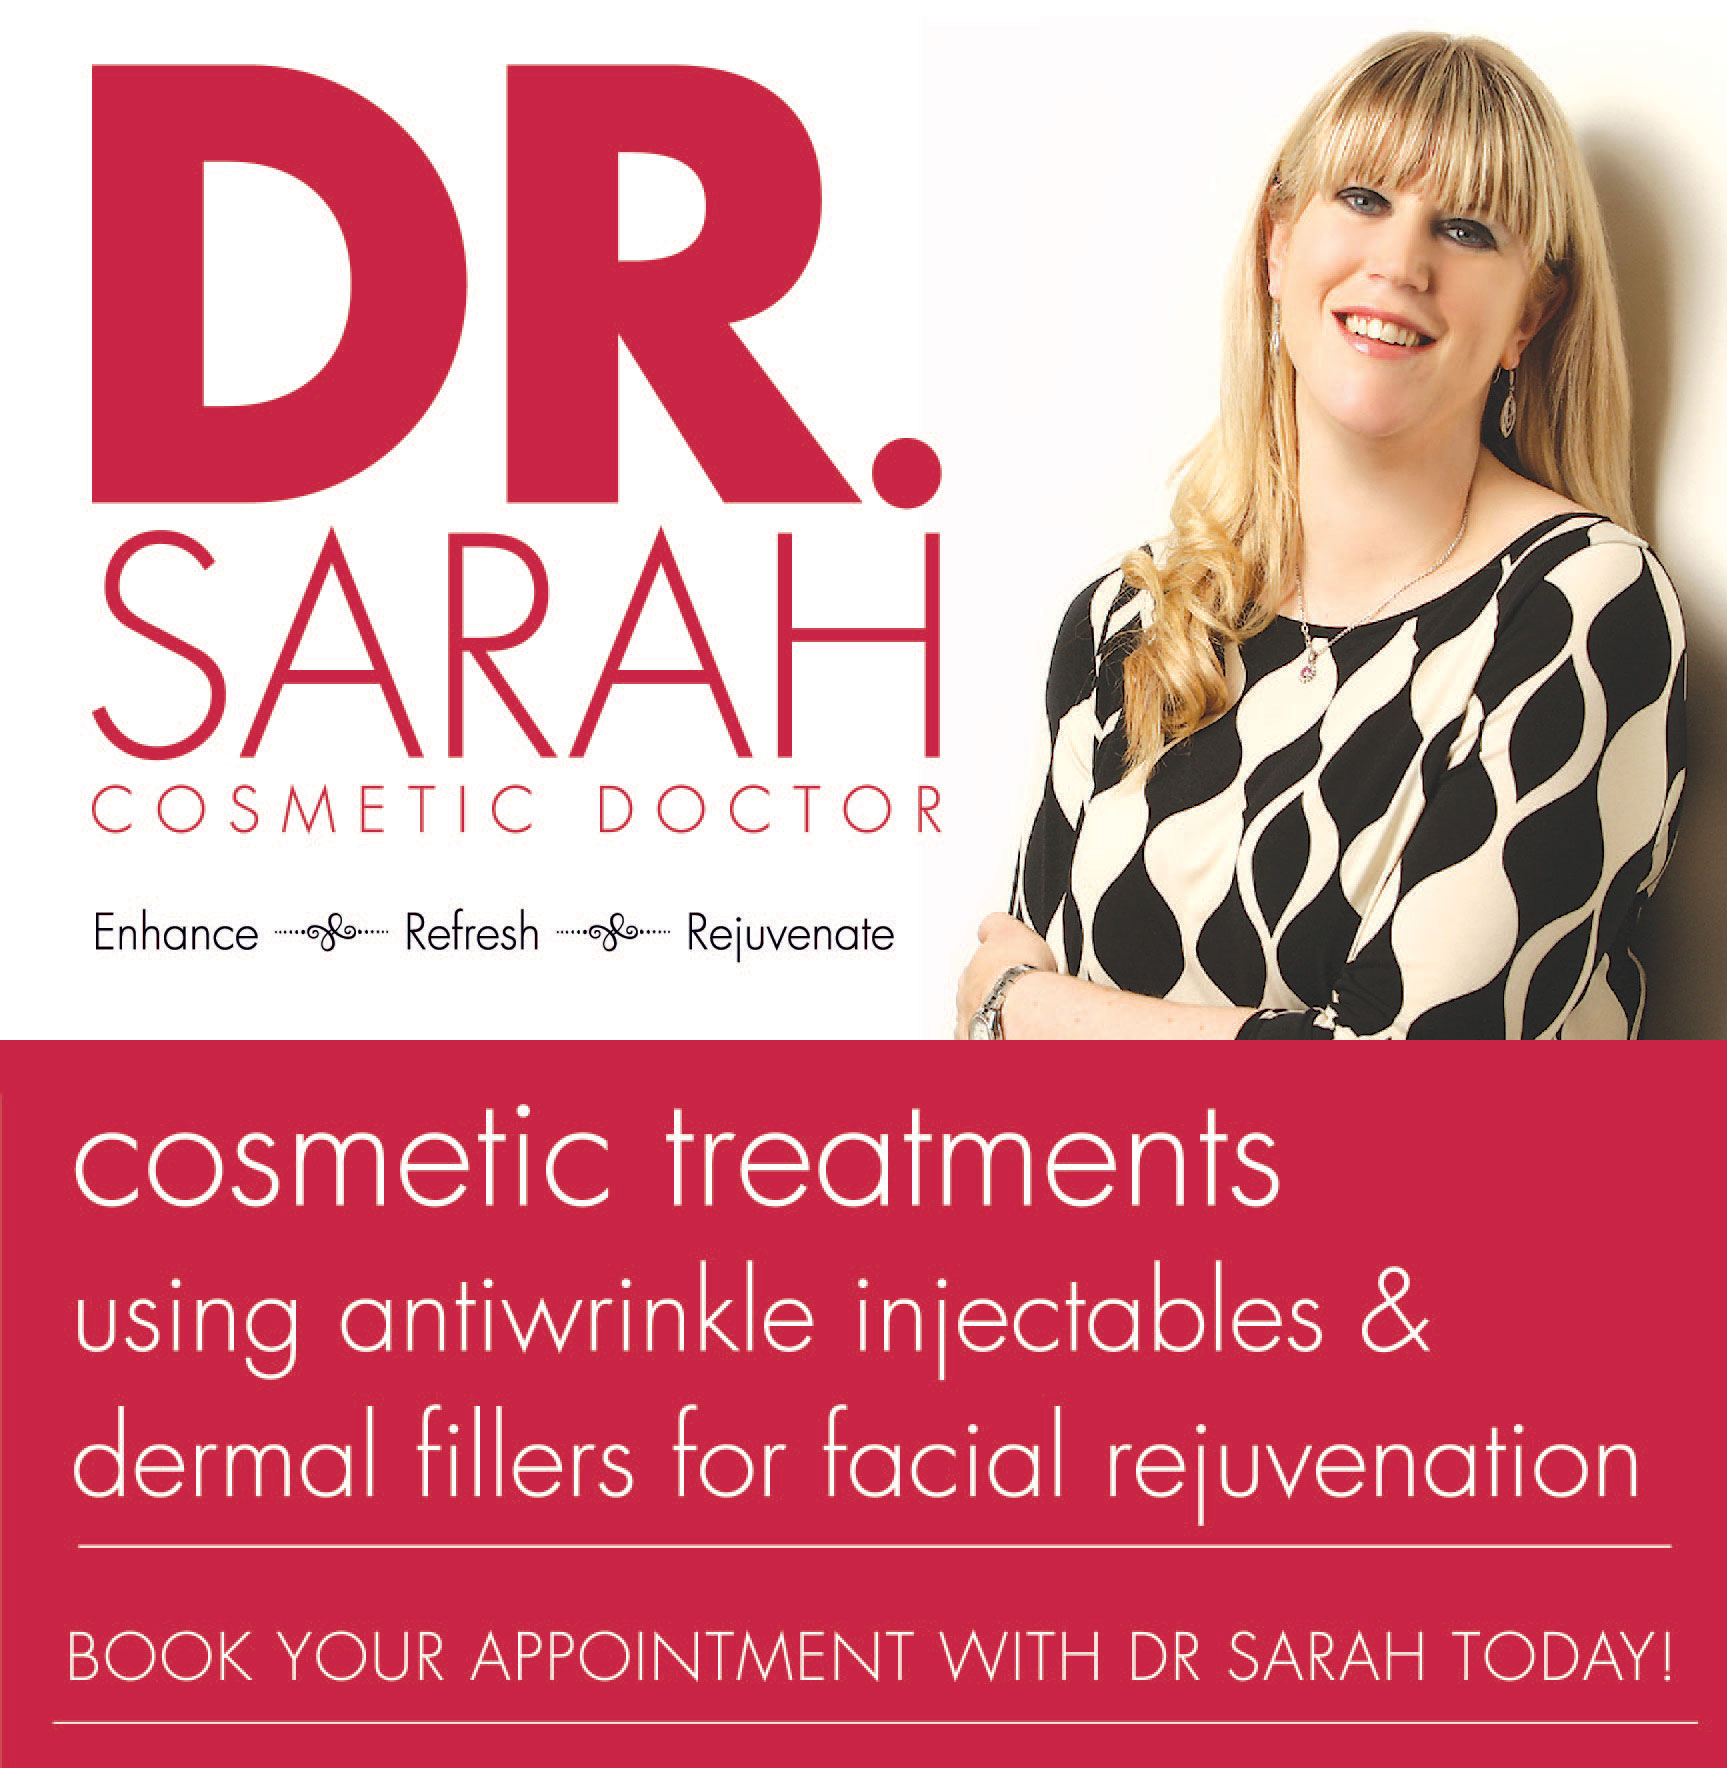 Dr Sarah Cosmetic Doctor